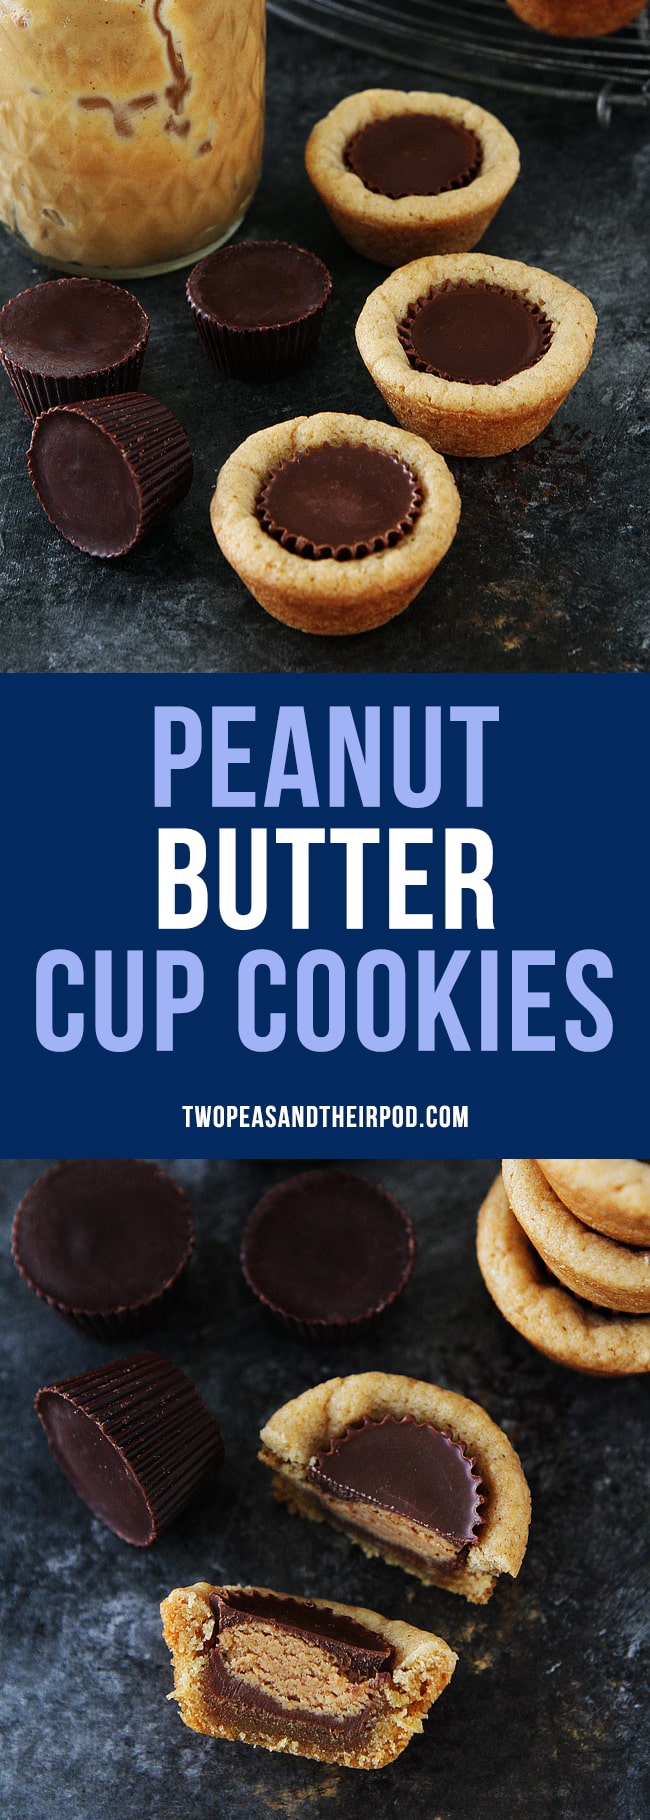 Peanut Butter Cup Cookies are a peanut butter lover's dream! You will love the peanut butter cup inside! A fun cookie to make and eat! #cookies #holidays #peanutbutter